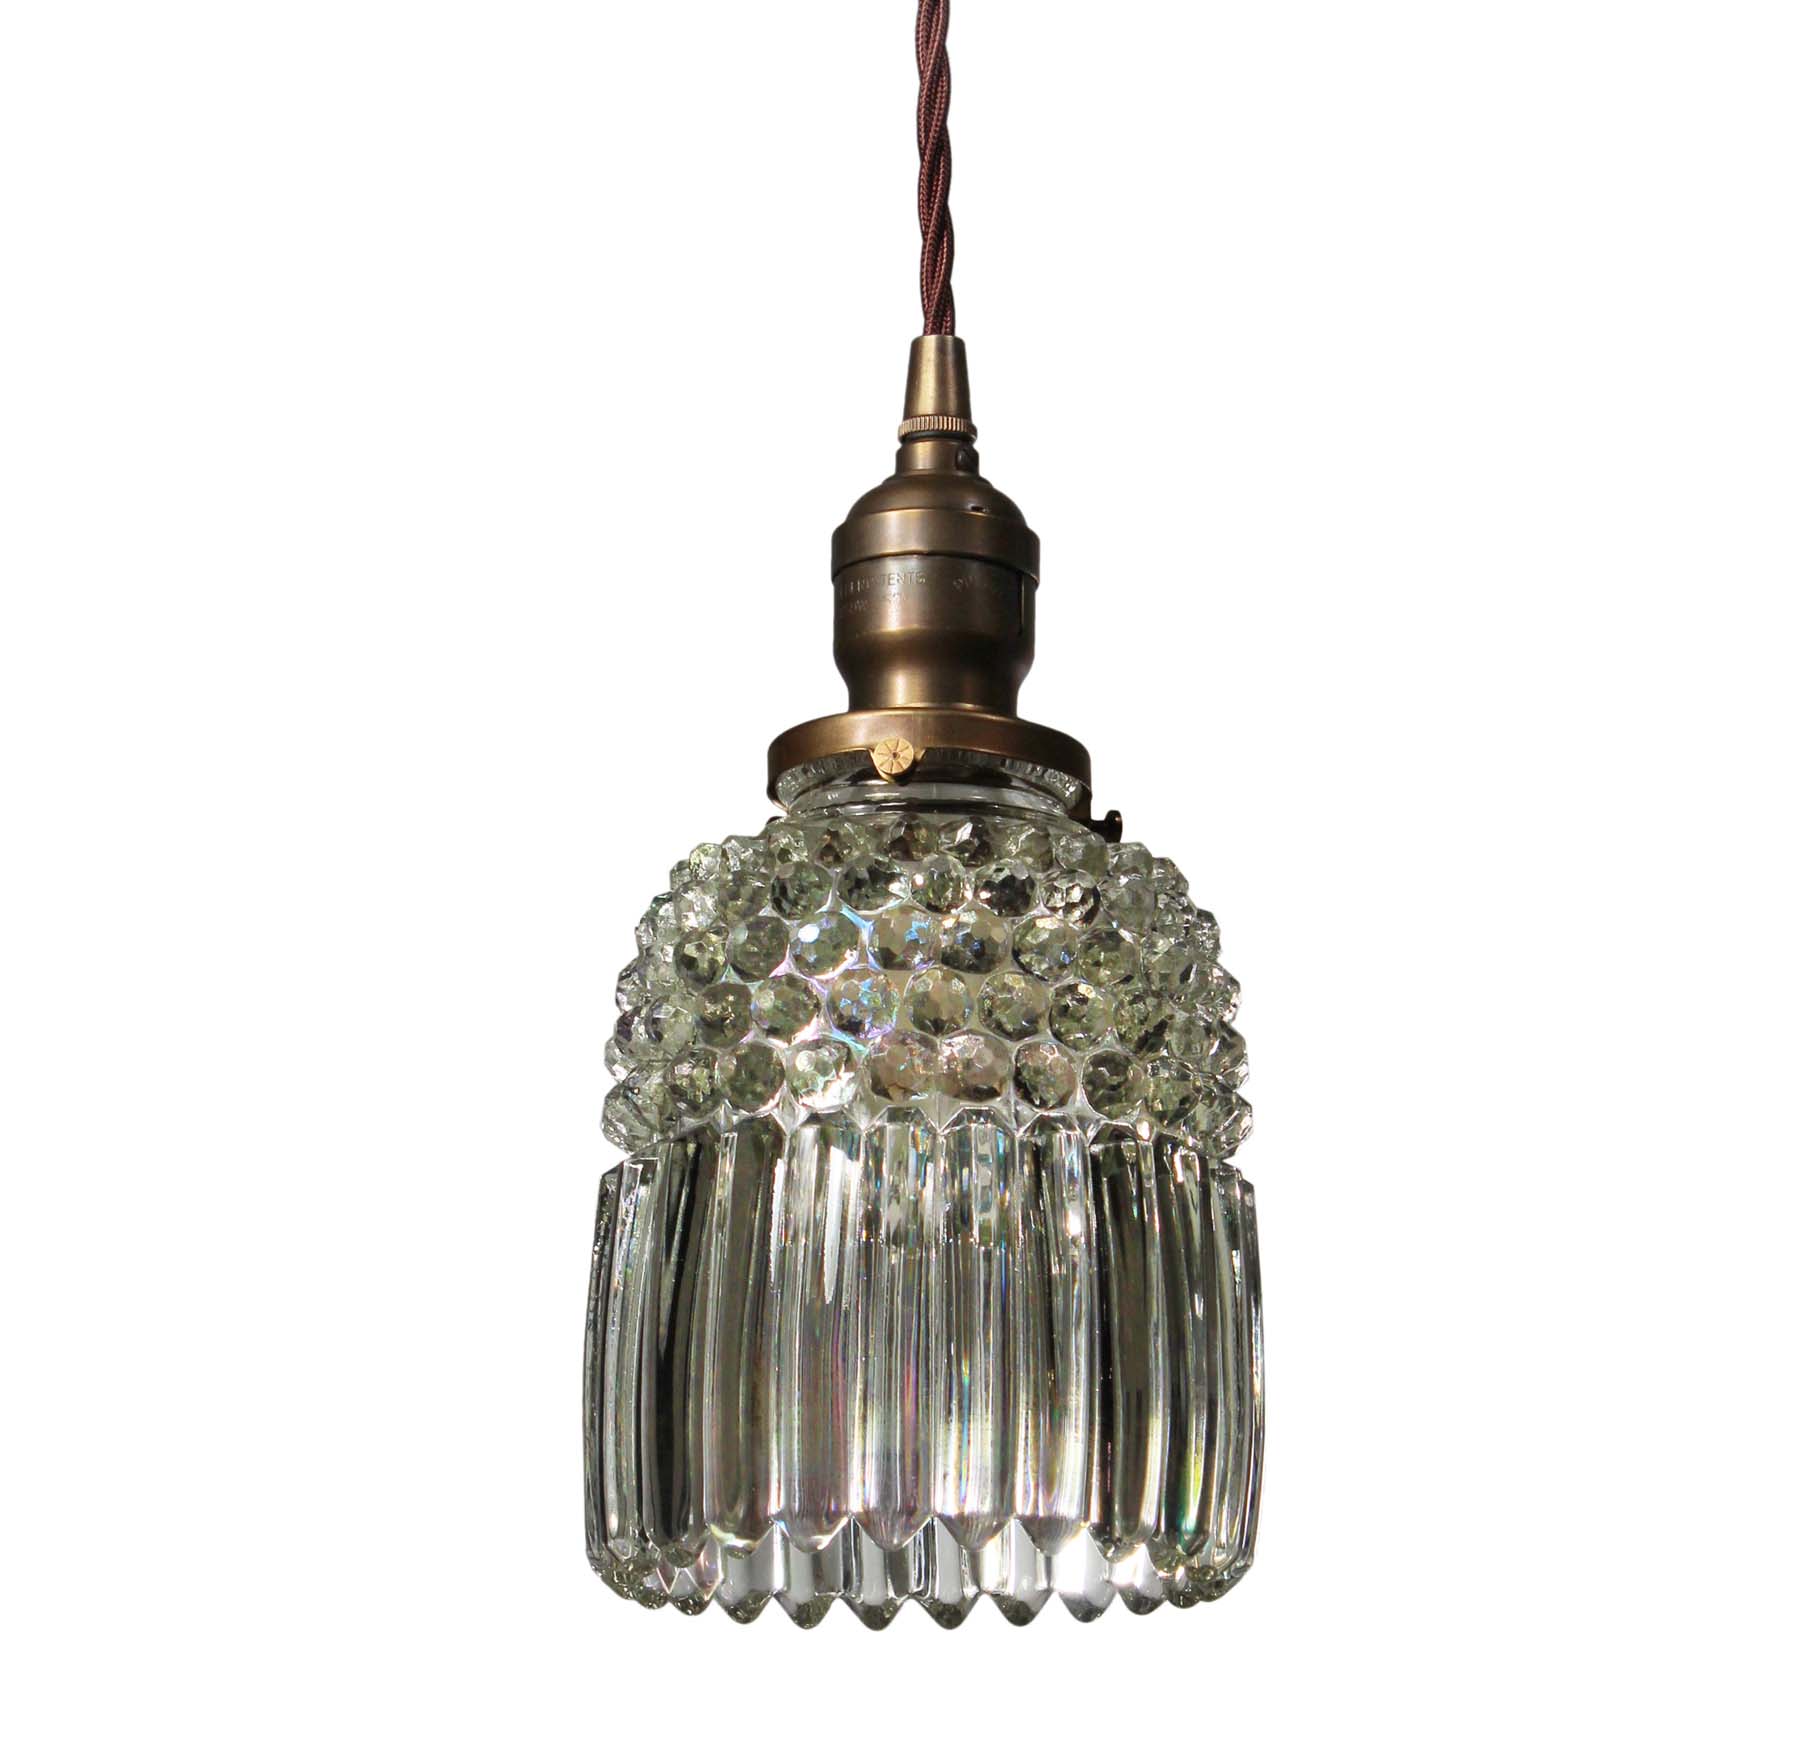 SOLD Antique Pendant Lights with Iridescent Glass Shades-68530